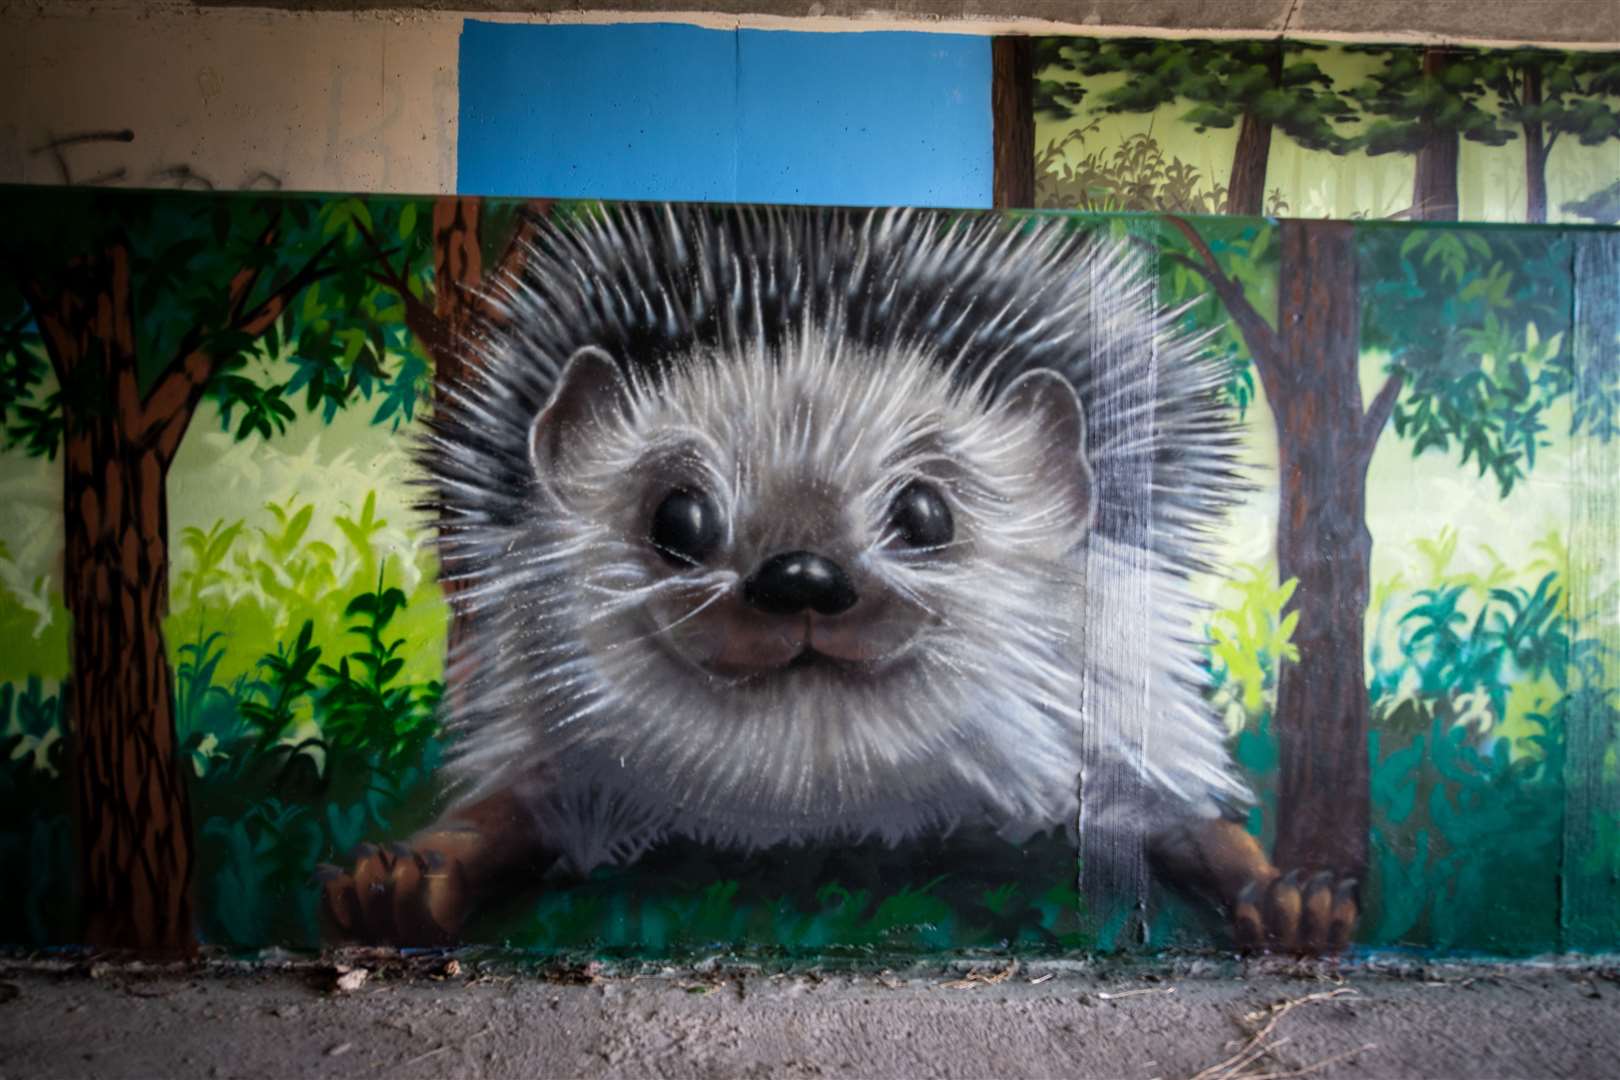 A hedgehog within the underpass.